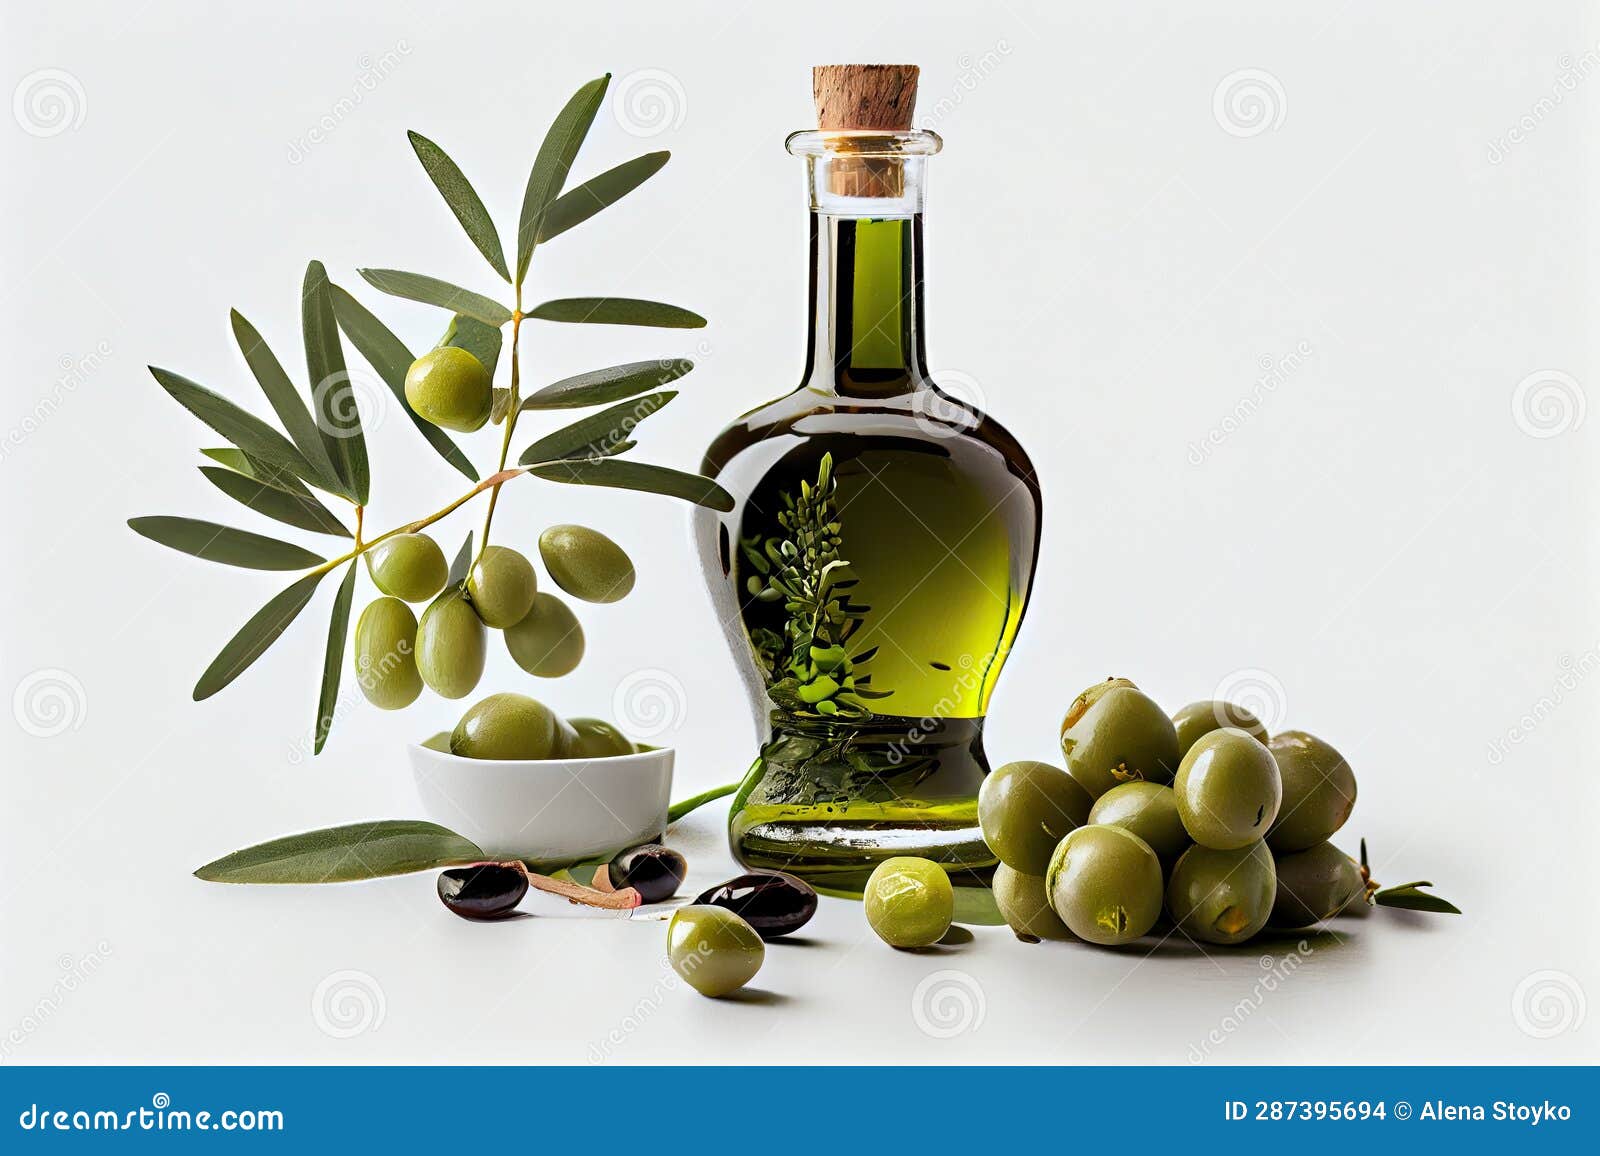 Bottle Olive Oil and Green Olives with Leaves on White Background ...